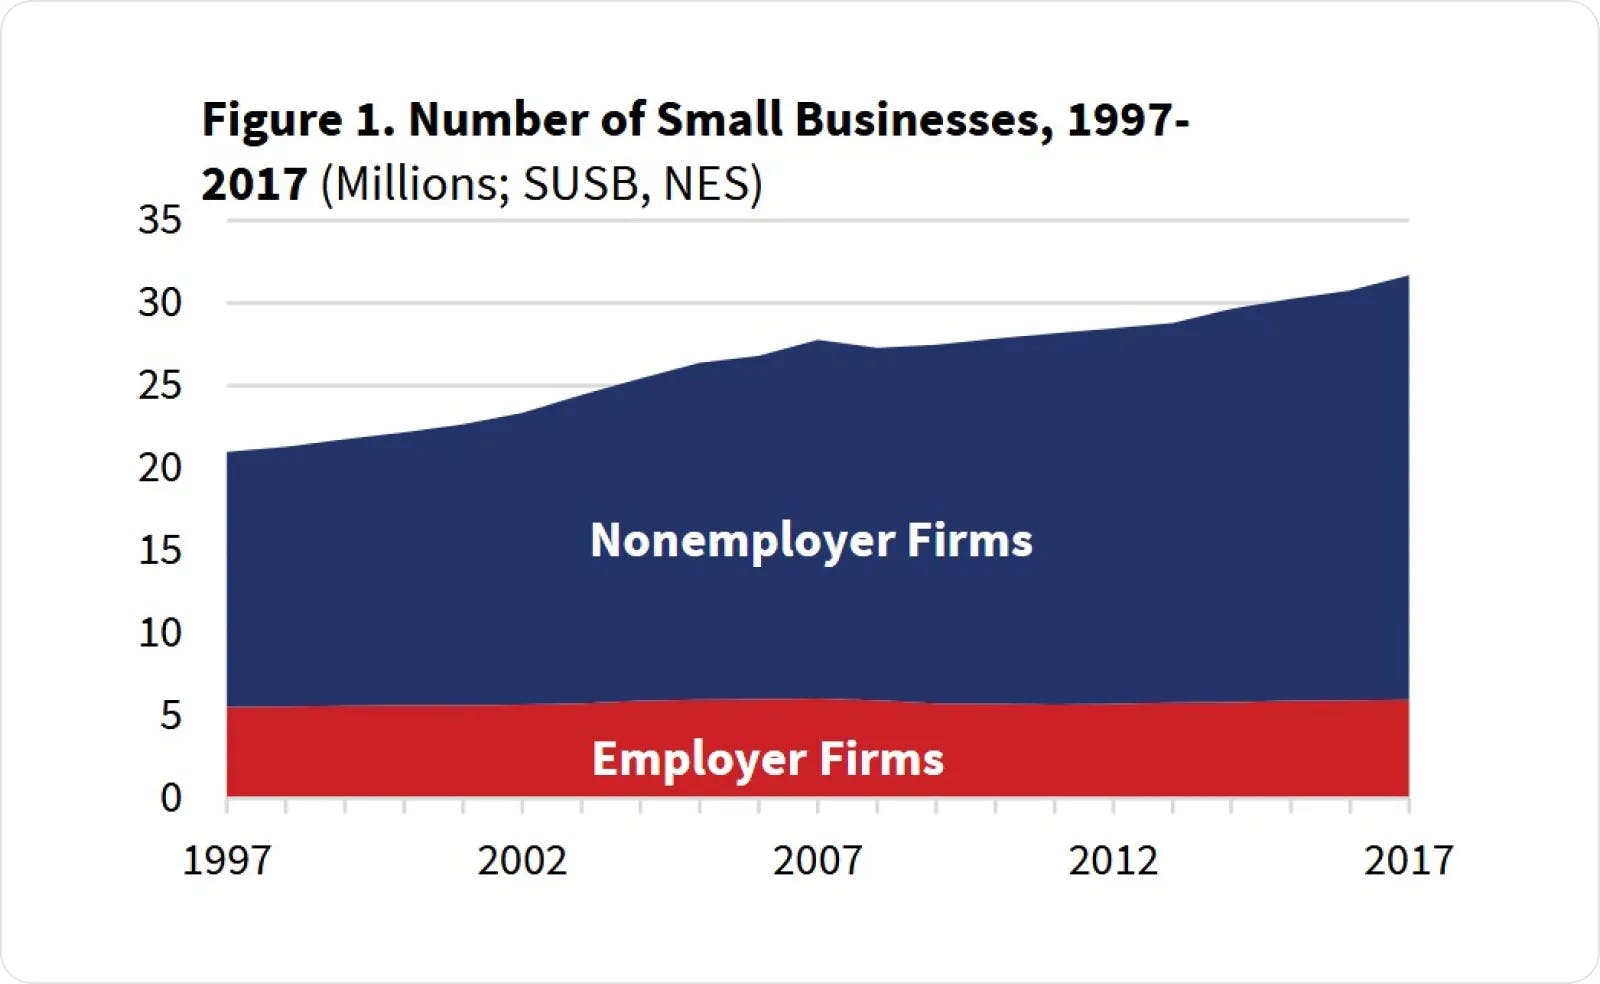 Number of small business 1997-2017 graph